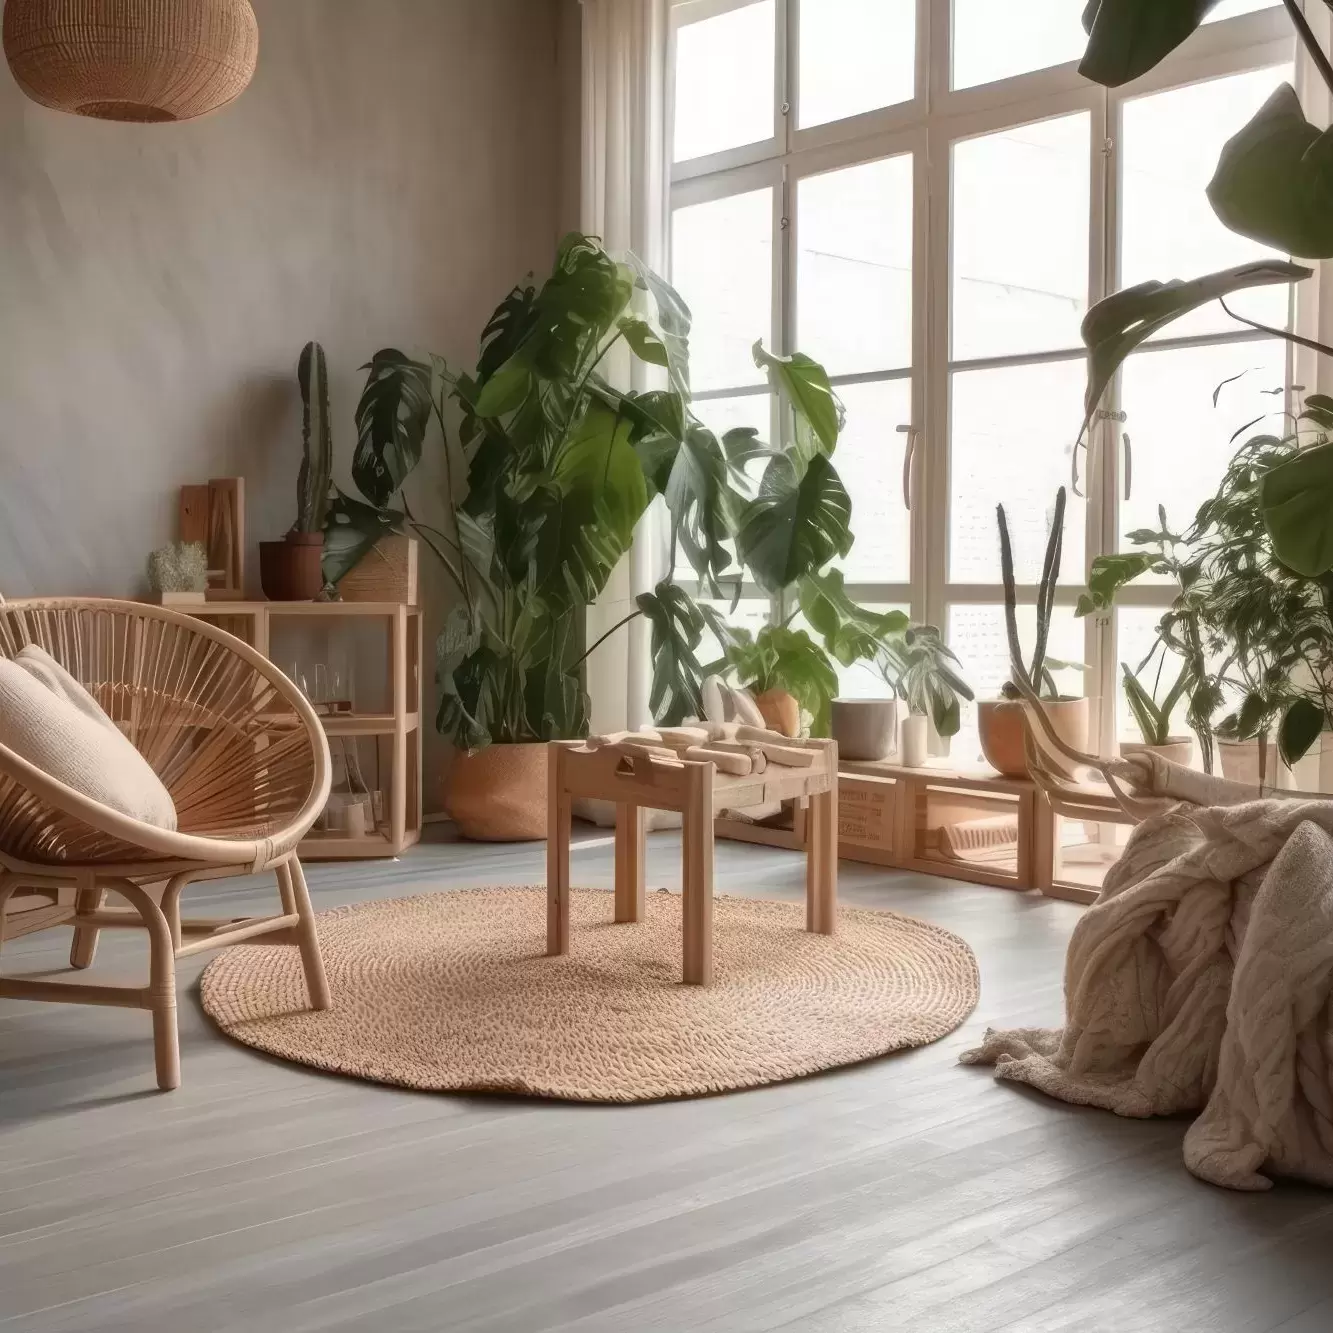 A quaint living space with earth tones and many plants